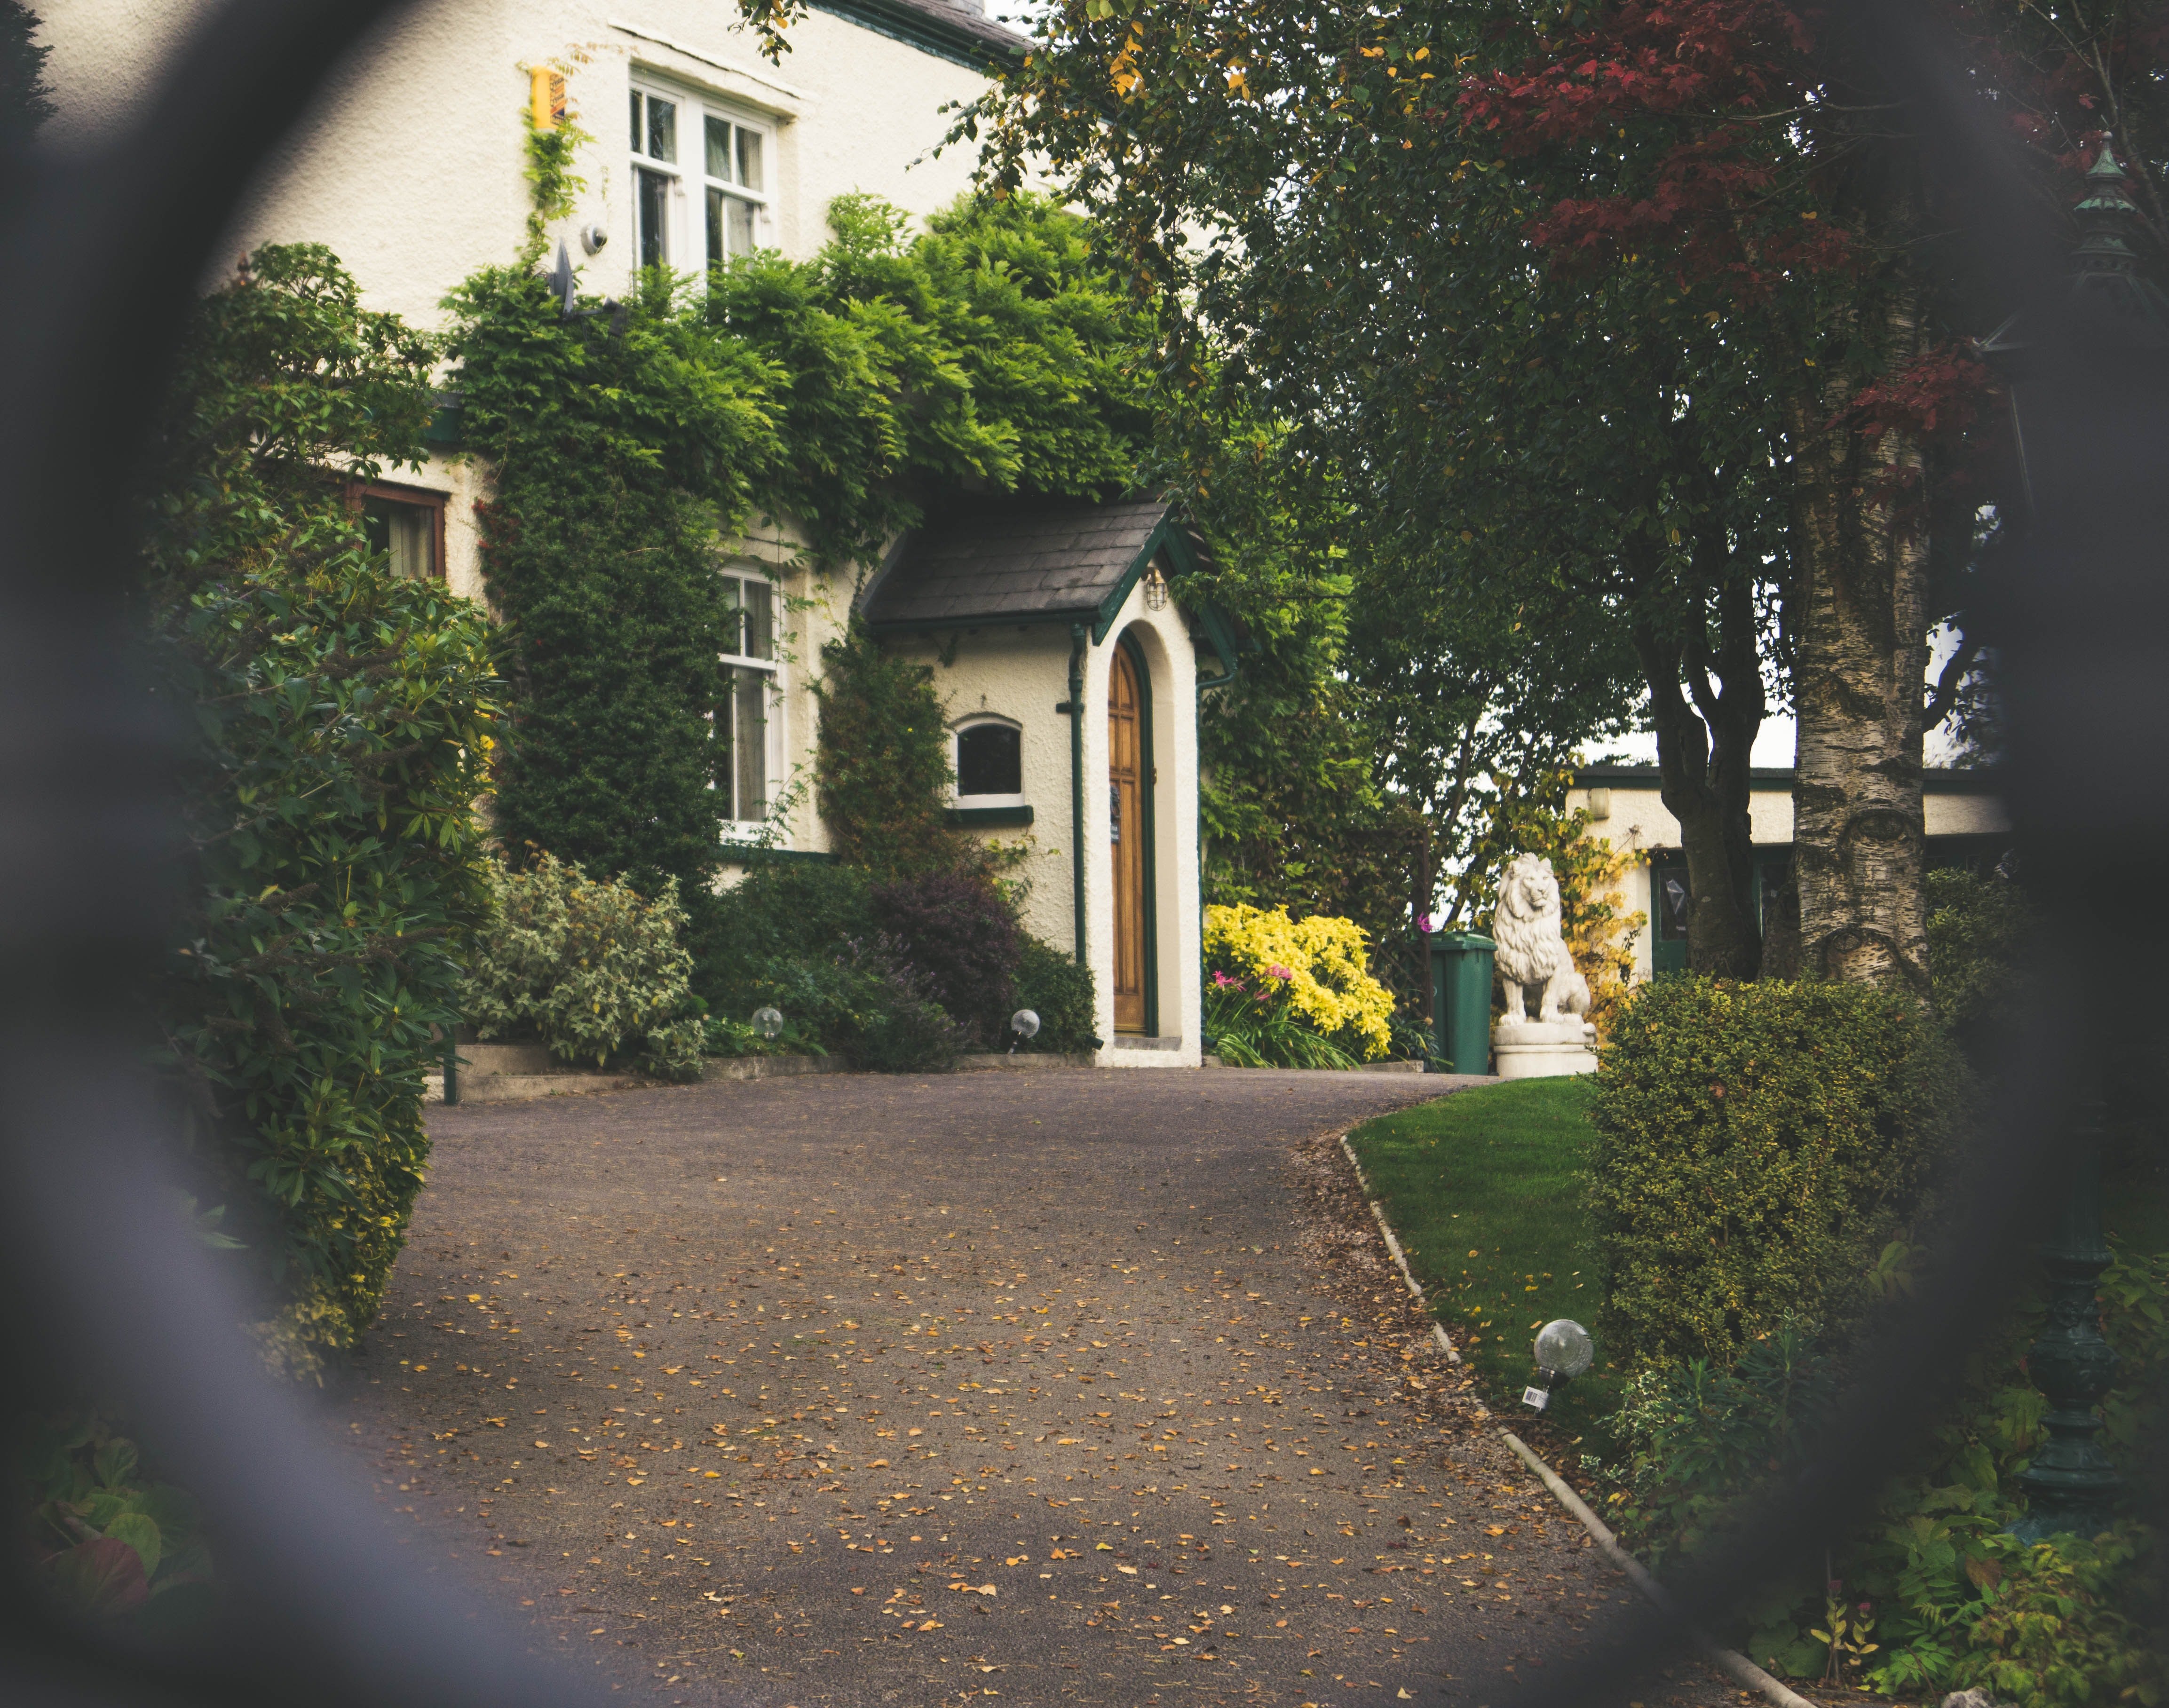 Andrew moved into his new house & was surprised by an empty neighborhood. | Source: Pexels